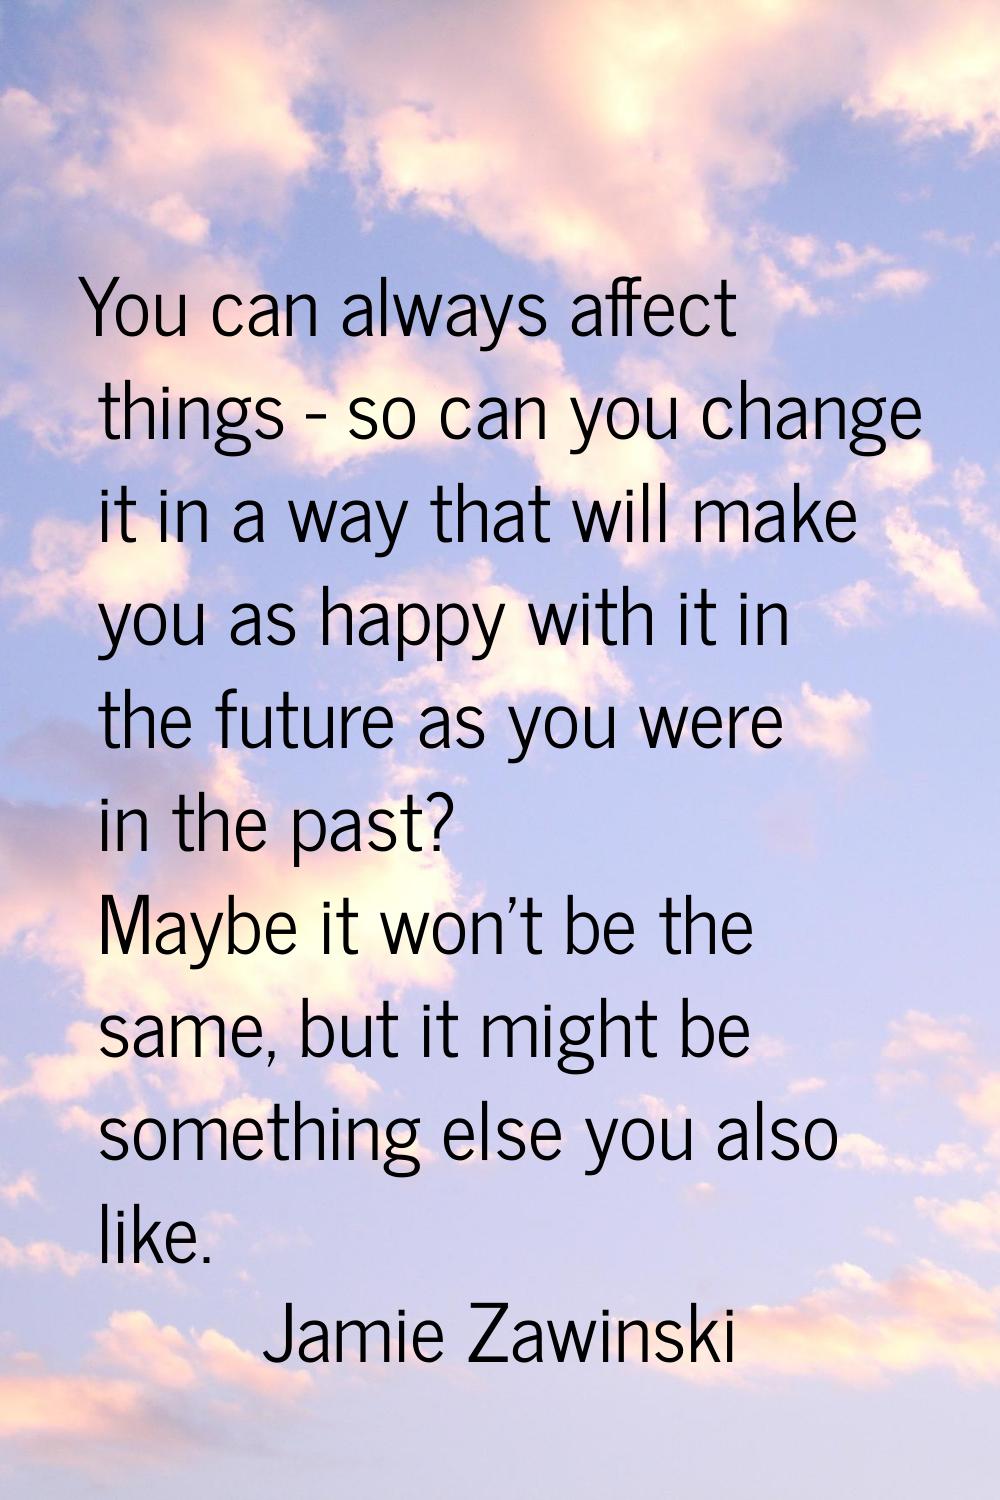 You can always affect things - so can you change it in a way that will make you as happy with it in